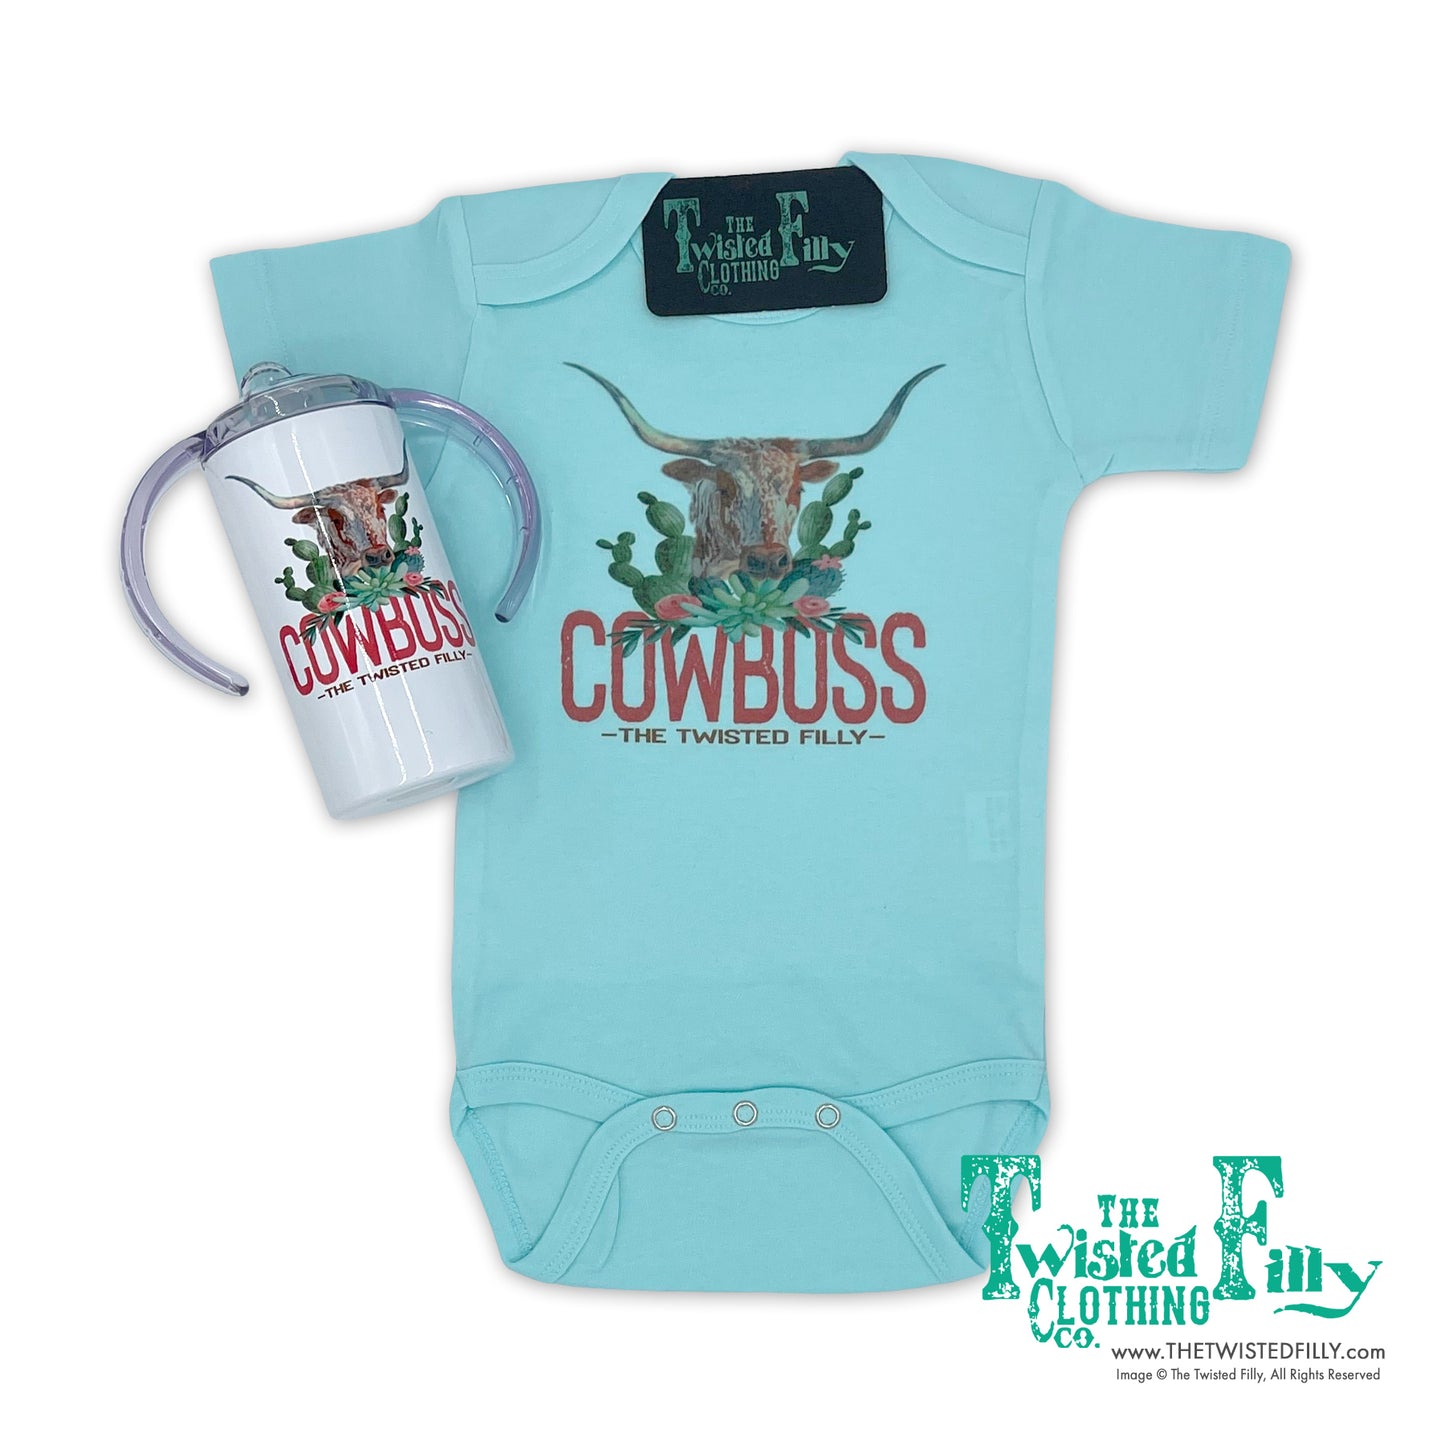 Cowboss - S/S Infant One Piece - Turquoise